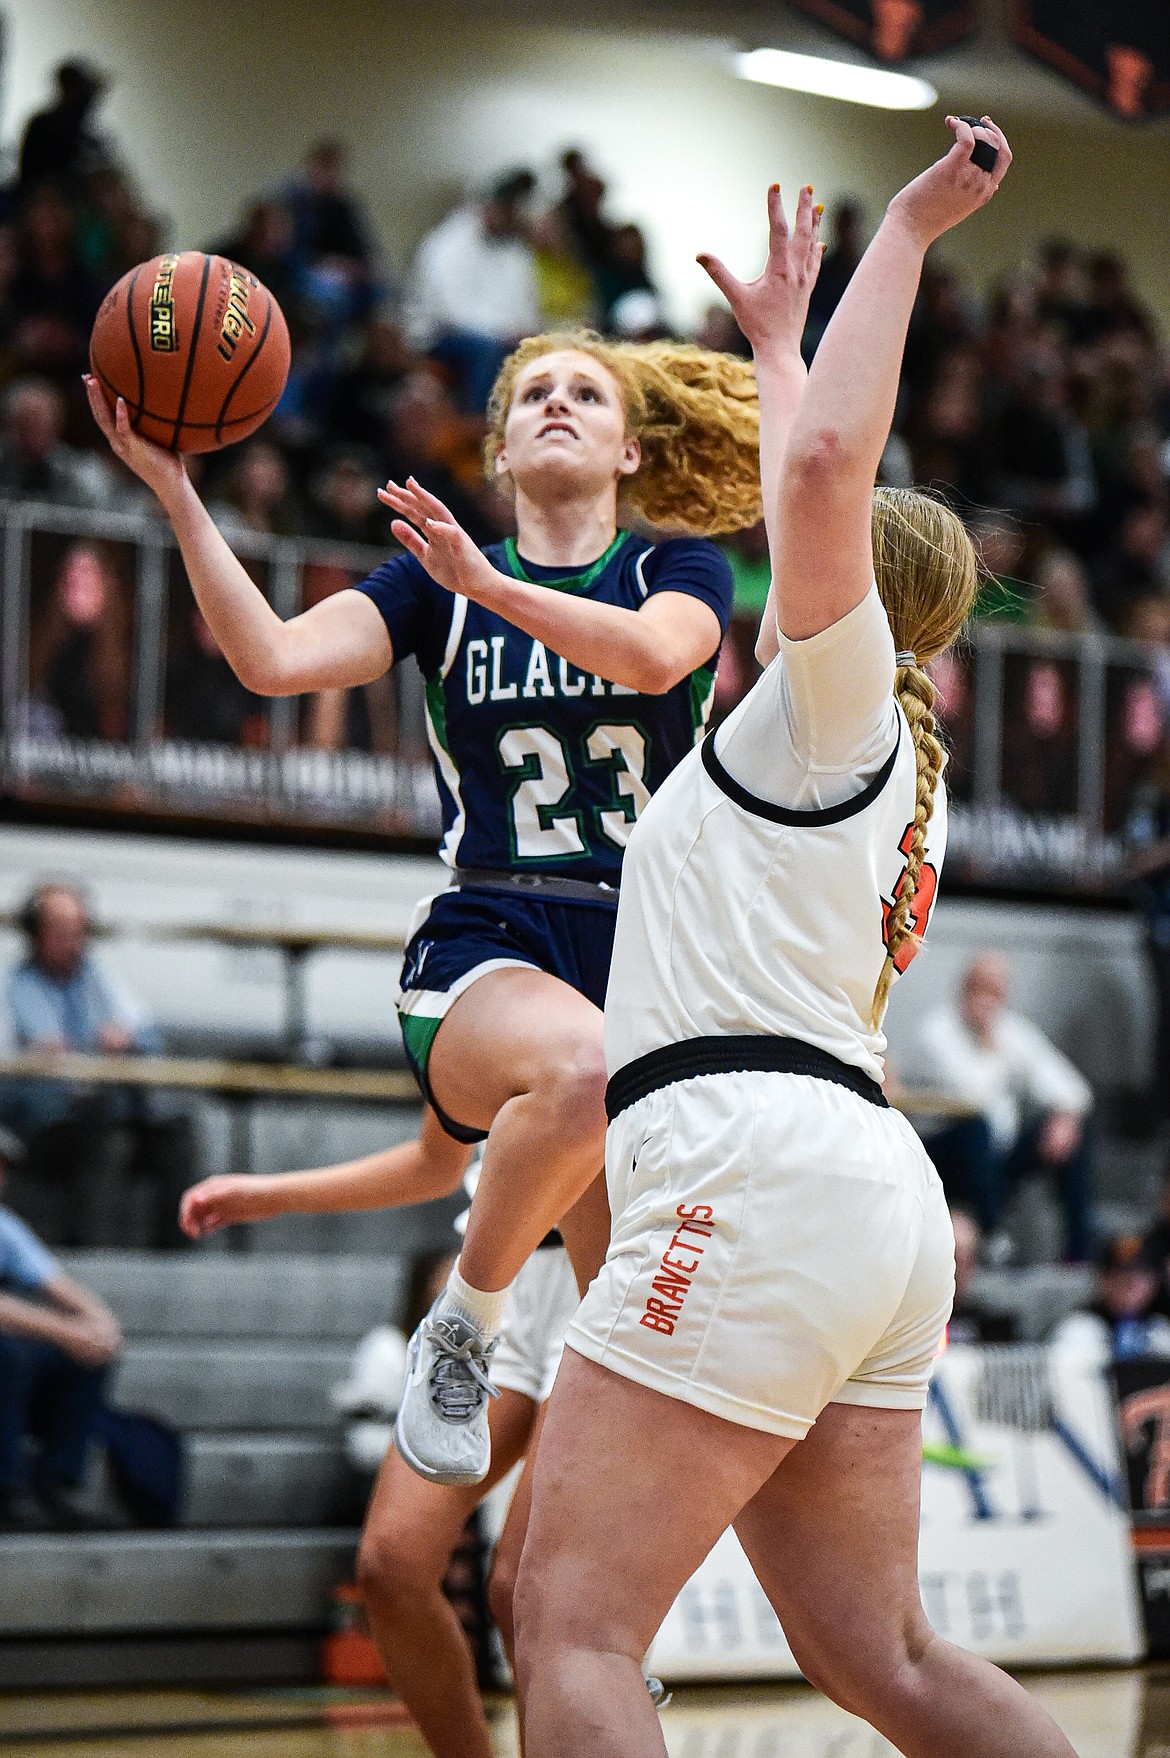 Glacier's Reese Ramey (23) drives to the basket against Flathead's Sami Dalager (33) at Flathead High School on Friday, Jan. 19. (Casey Kreider/Daily Inter Lake)